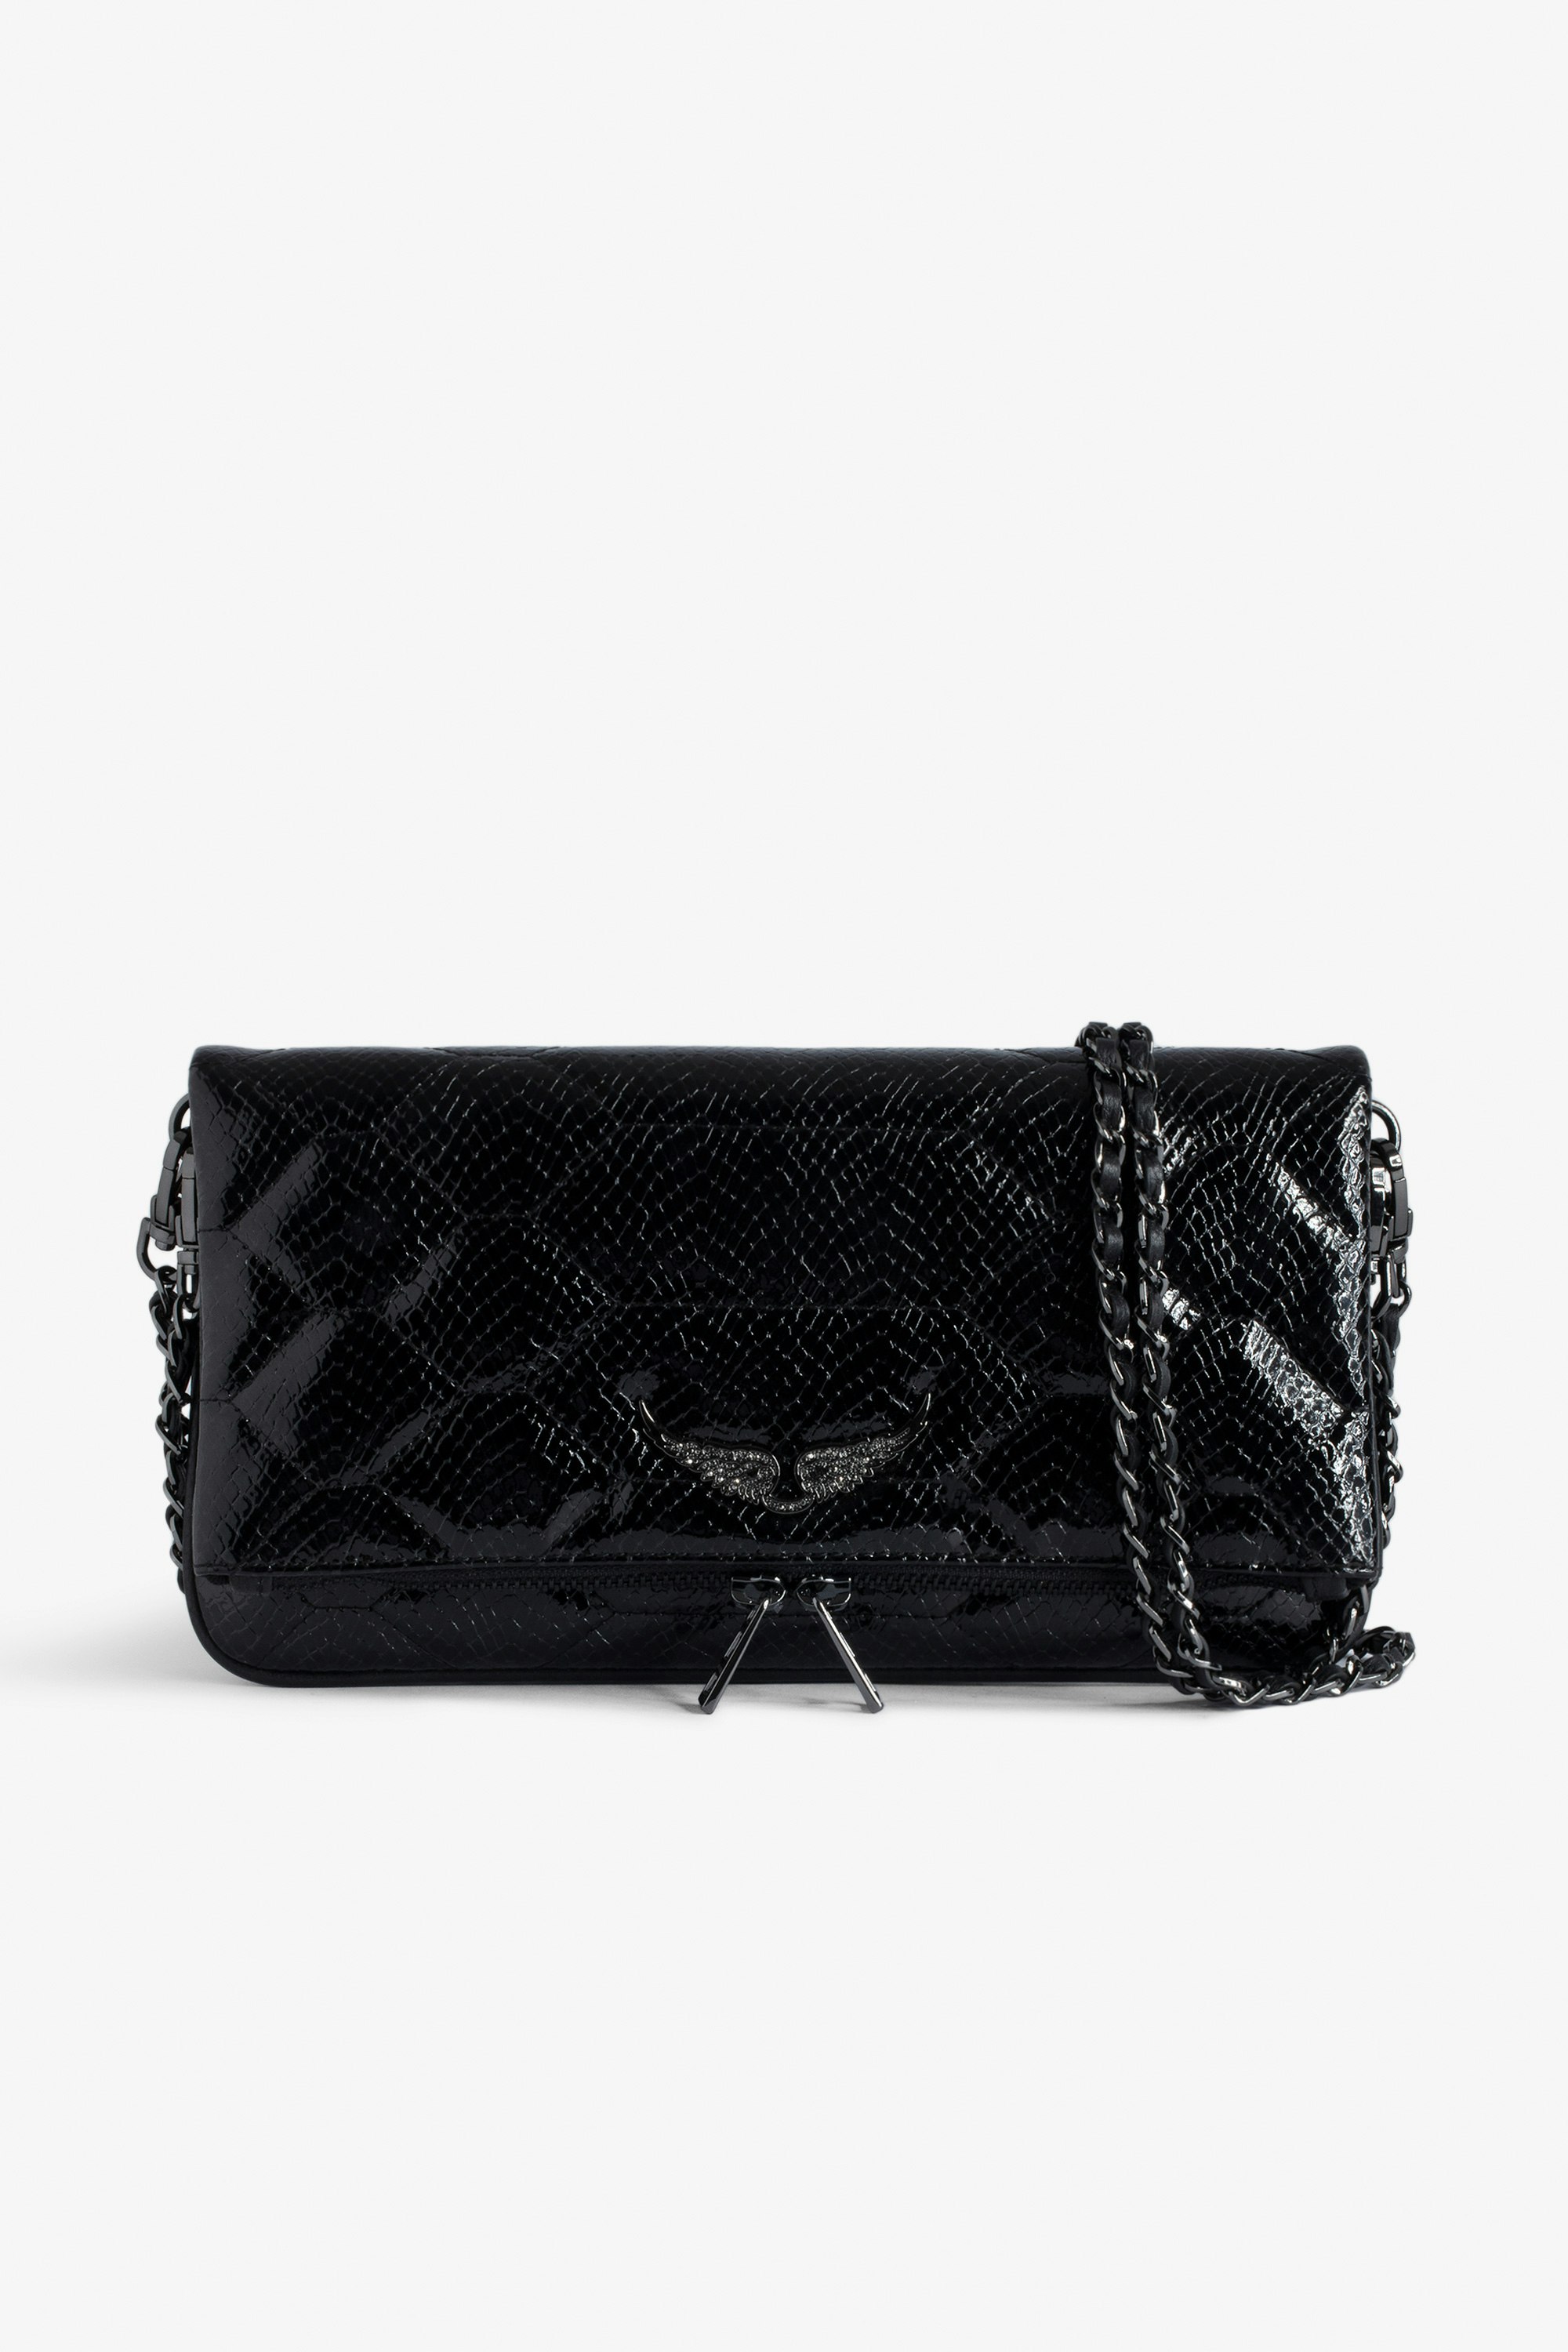 Rock Glossy Wild Quilted Clutch Women’s black quilted python-effect patent leather clutch with diamanté wings charm.